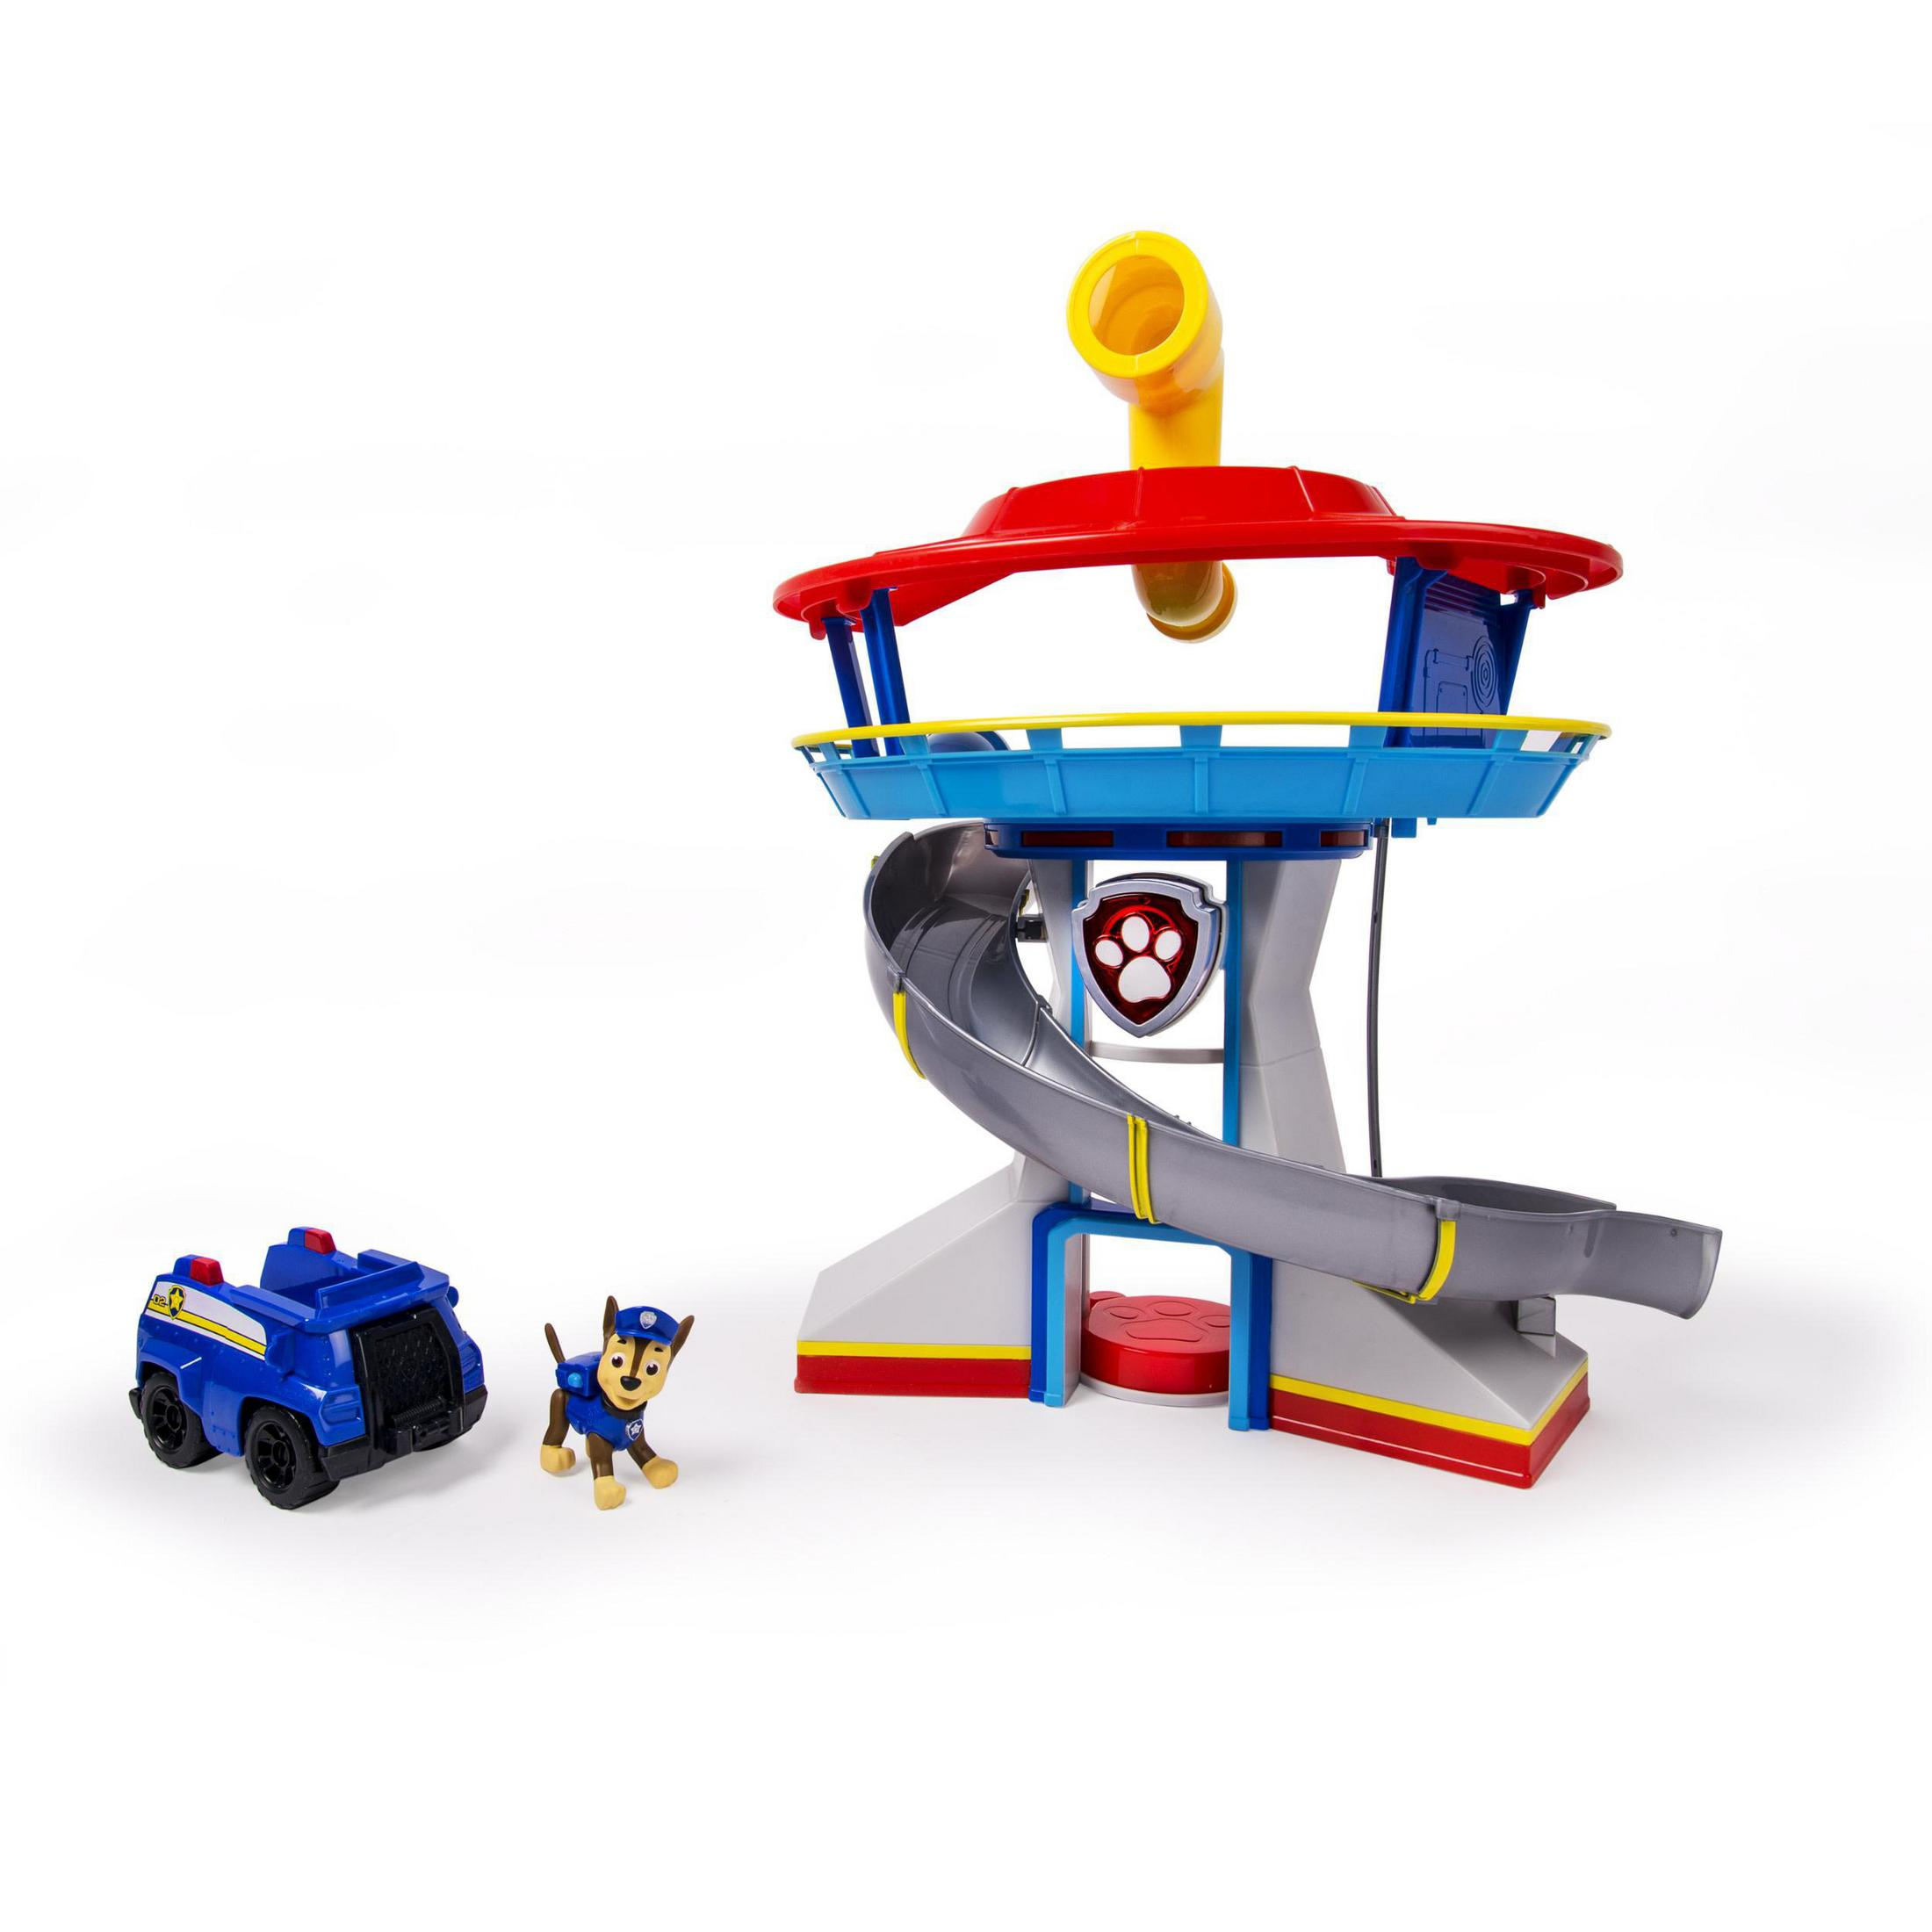 SPIN MASTER 32794 PAW Mehrfarbig LOOKOUT (HEADQUARTER) PLAYSET Spielset TOWER